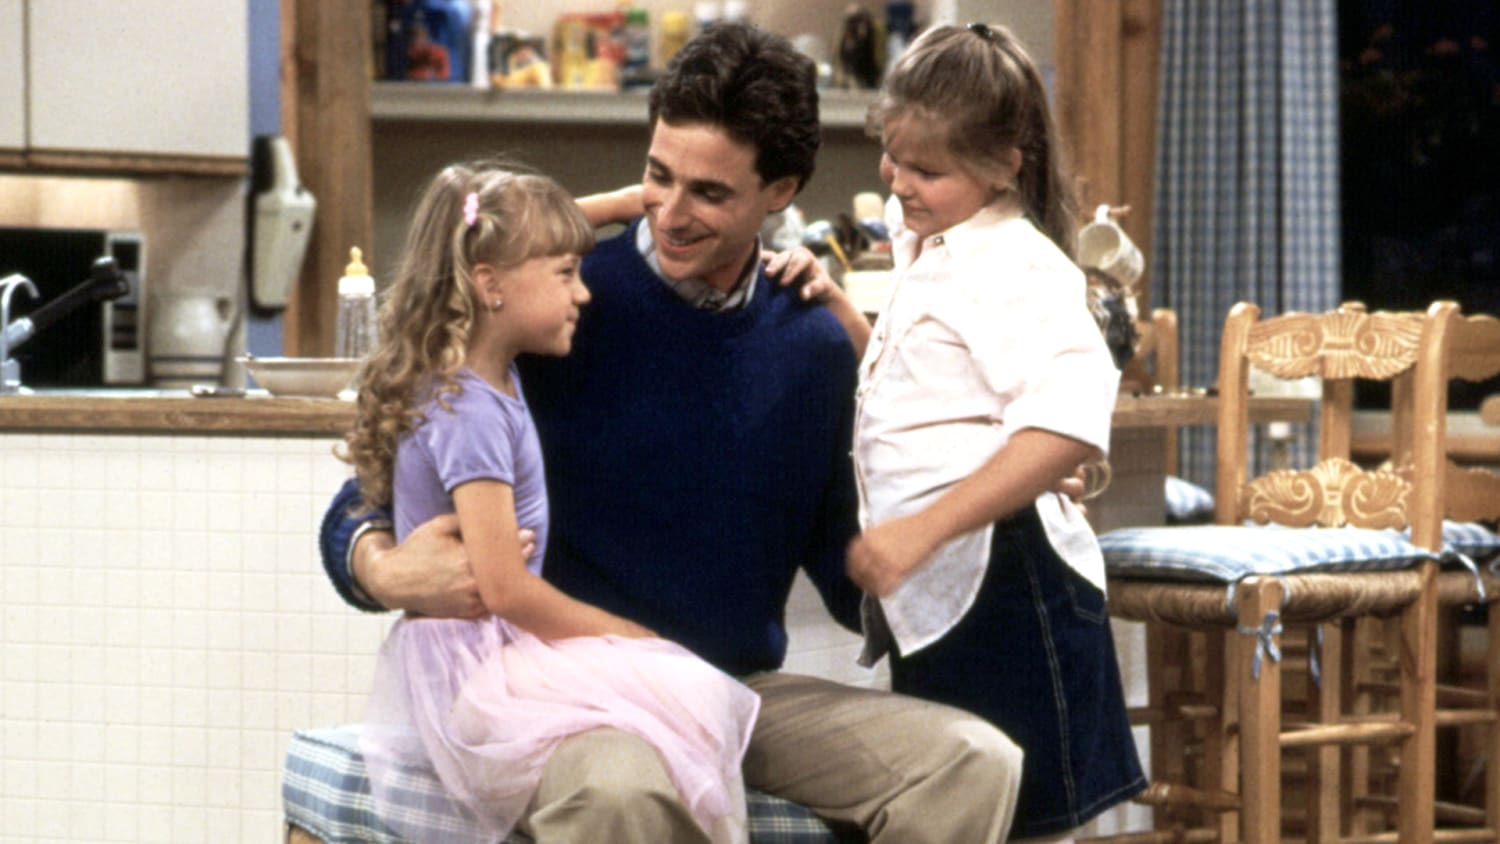 Bob Saget will join 'Fuller House' cast - TODAY.com